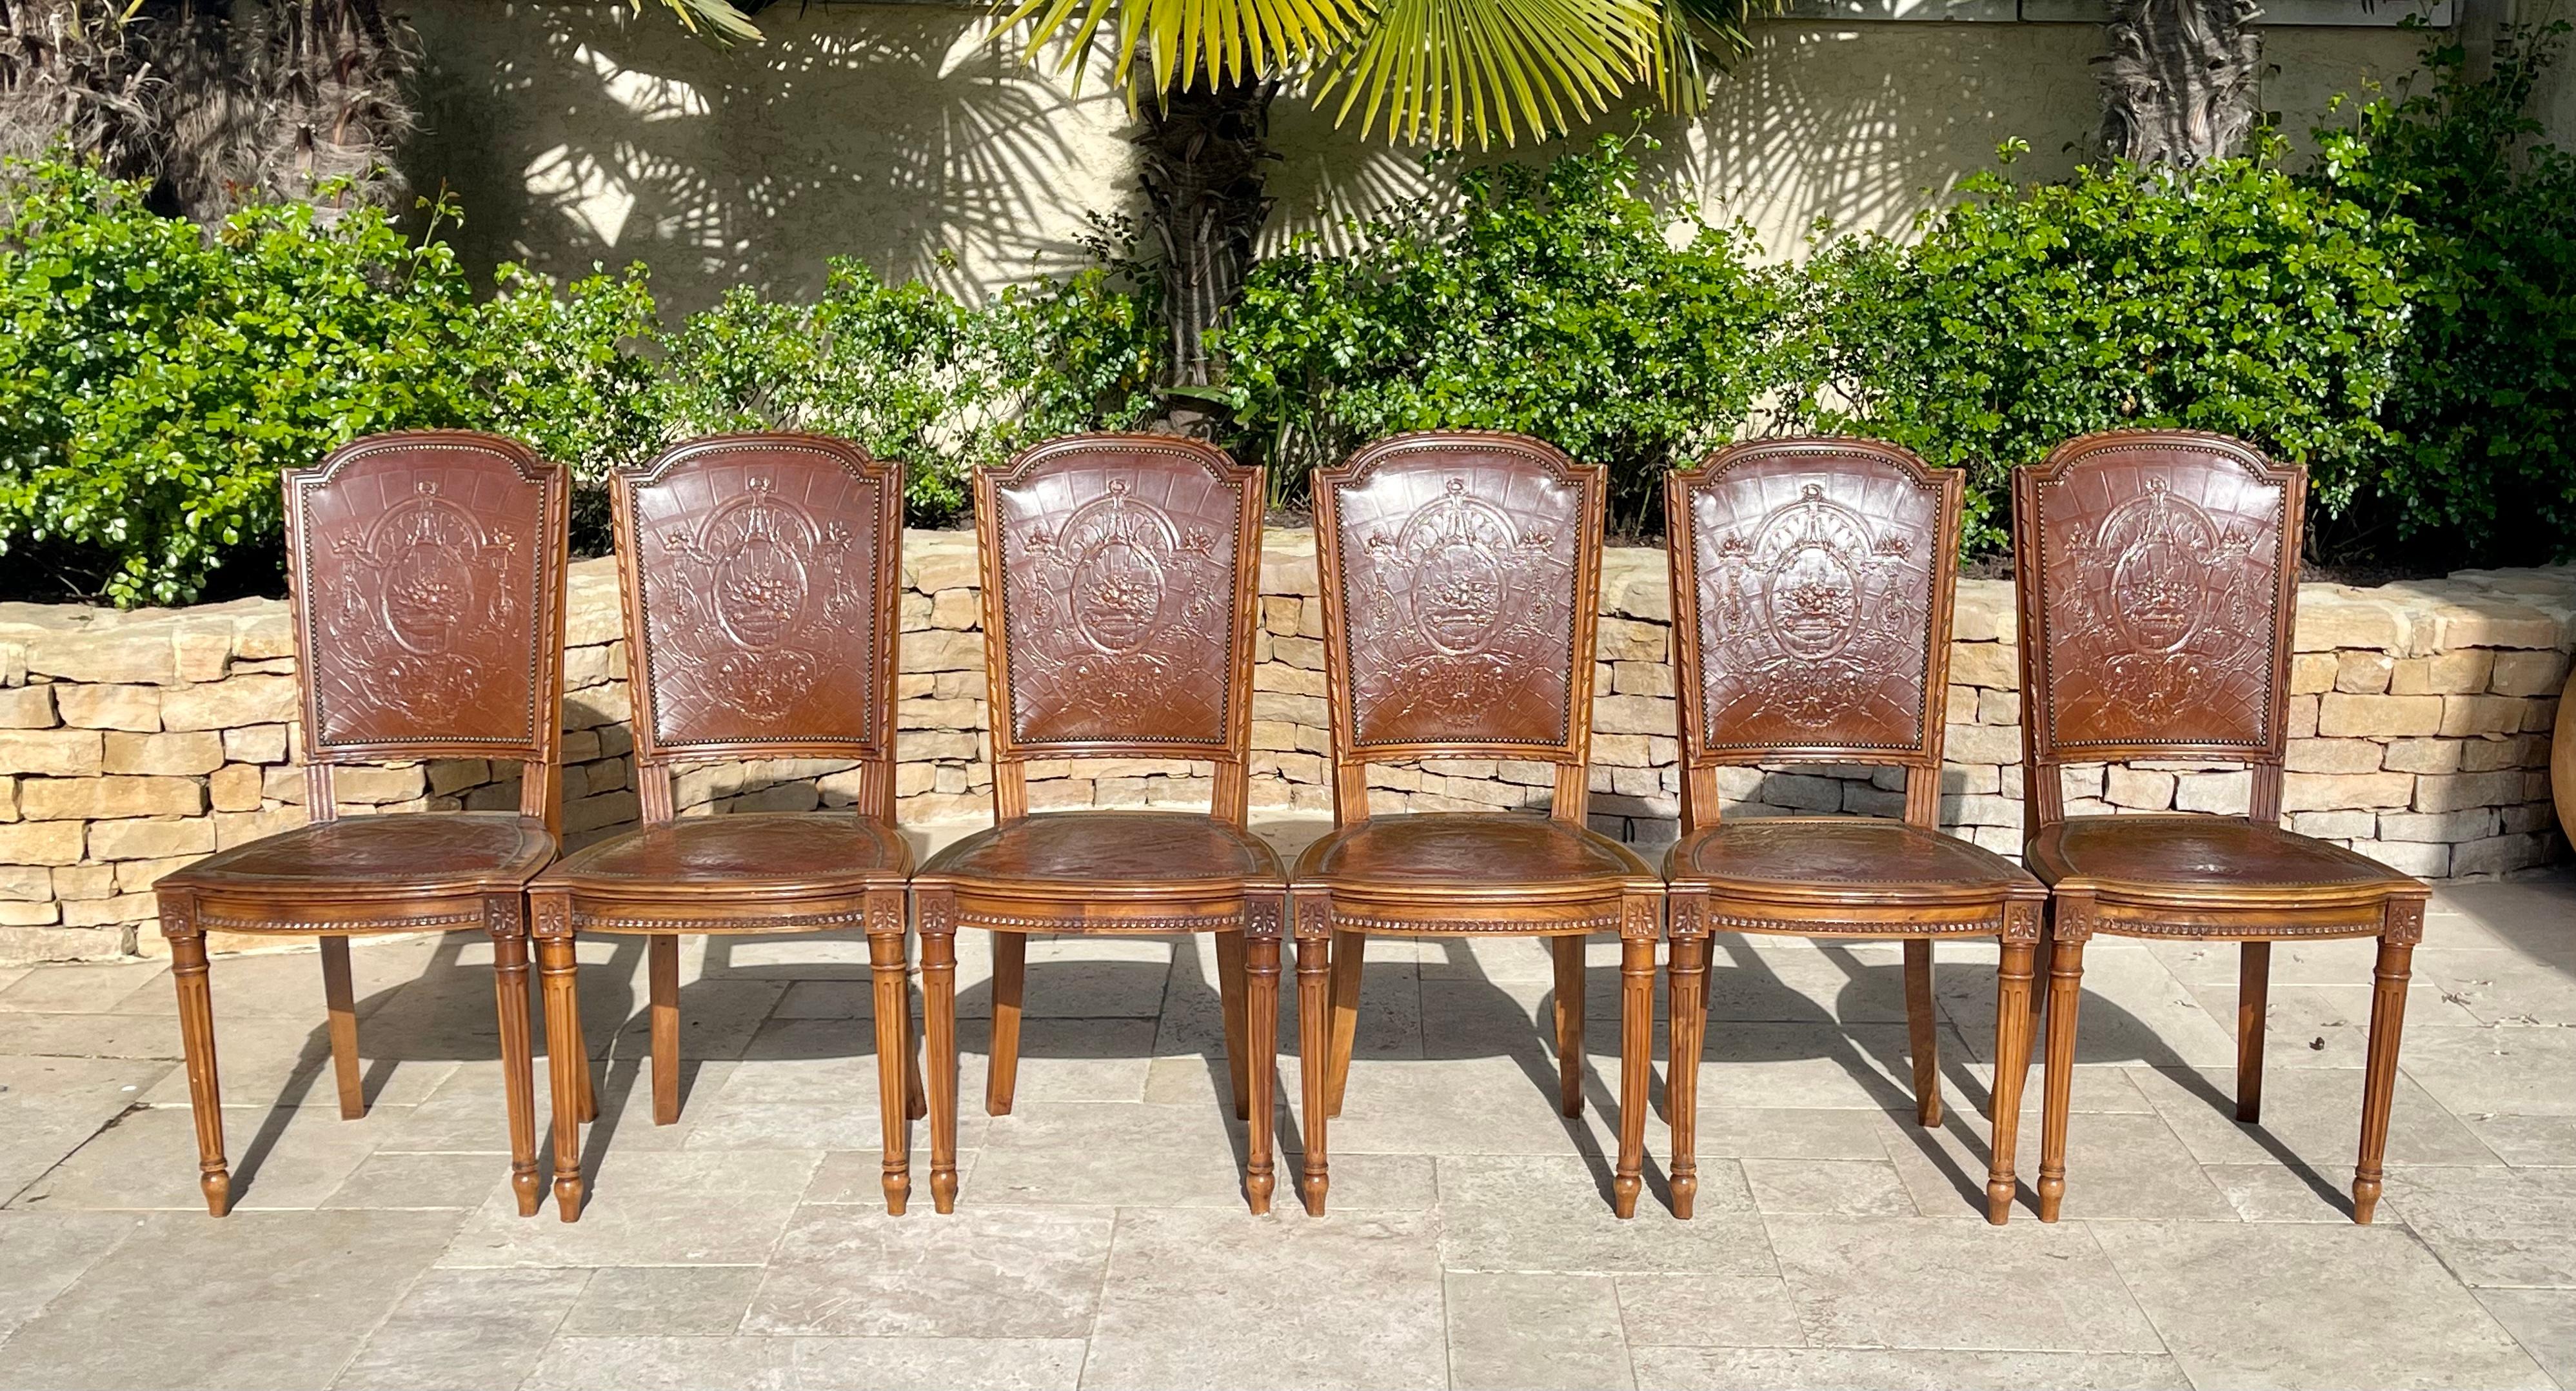 Suite of 6 Louis XVI style chairs in carved walnut covered in embossed brown leather, Cordoba leather. This series is very elegant and in very good condition.

Dimensions
Total height 96cm
Seat height 45cm
Width 47cm
Depth 45cm